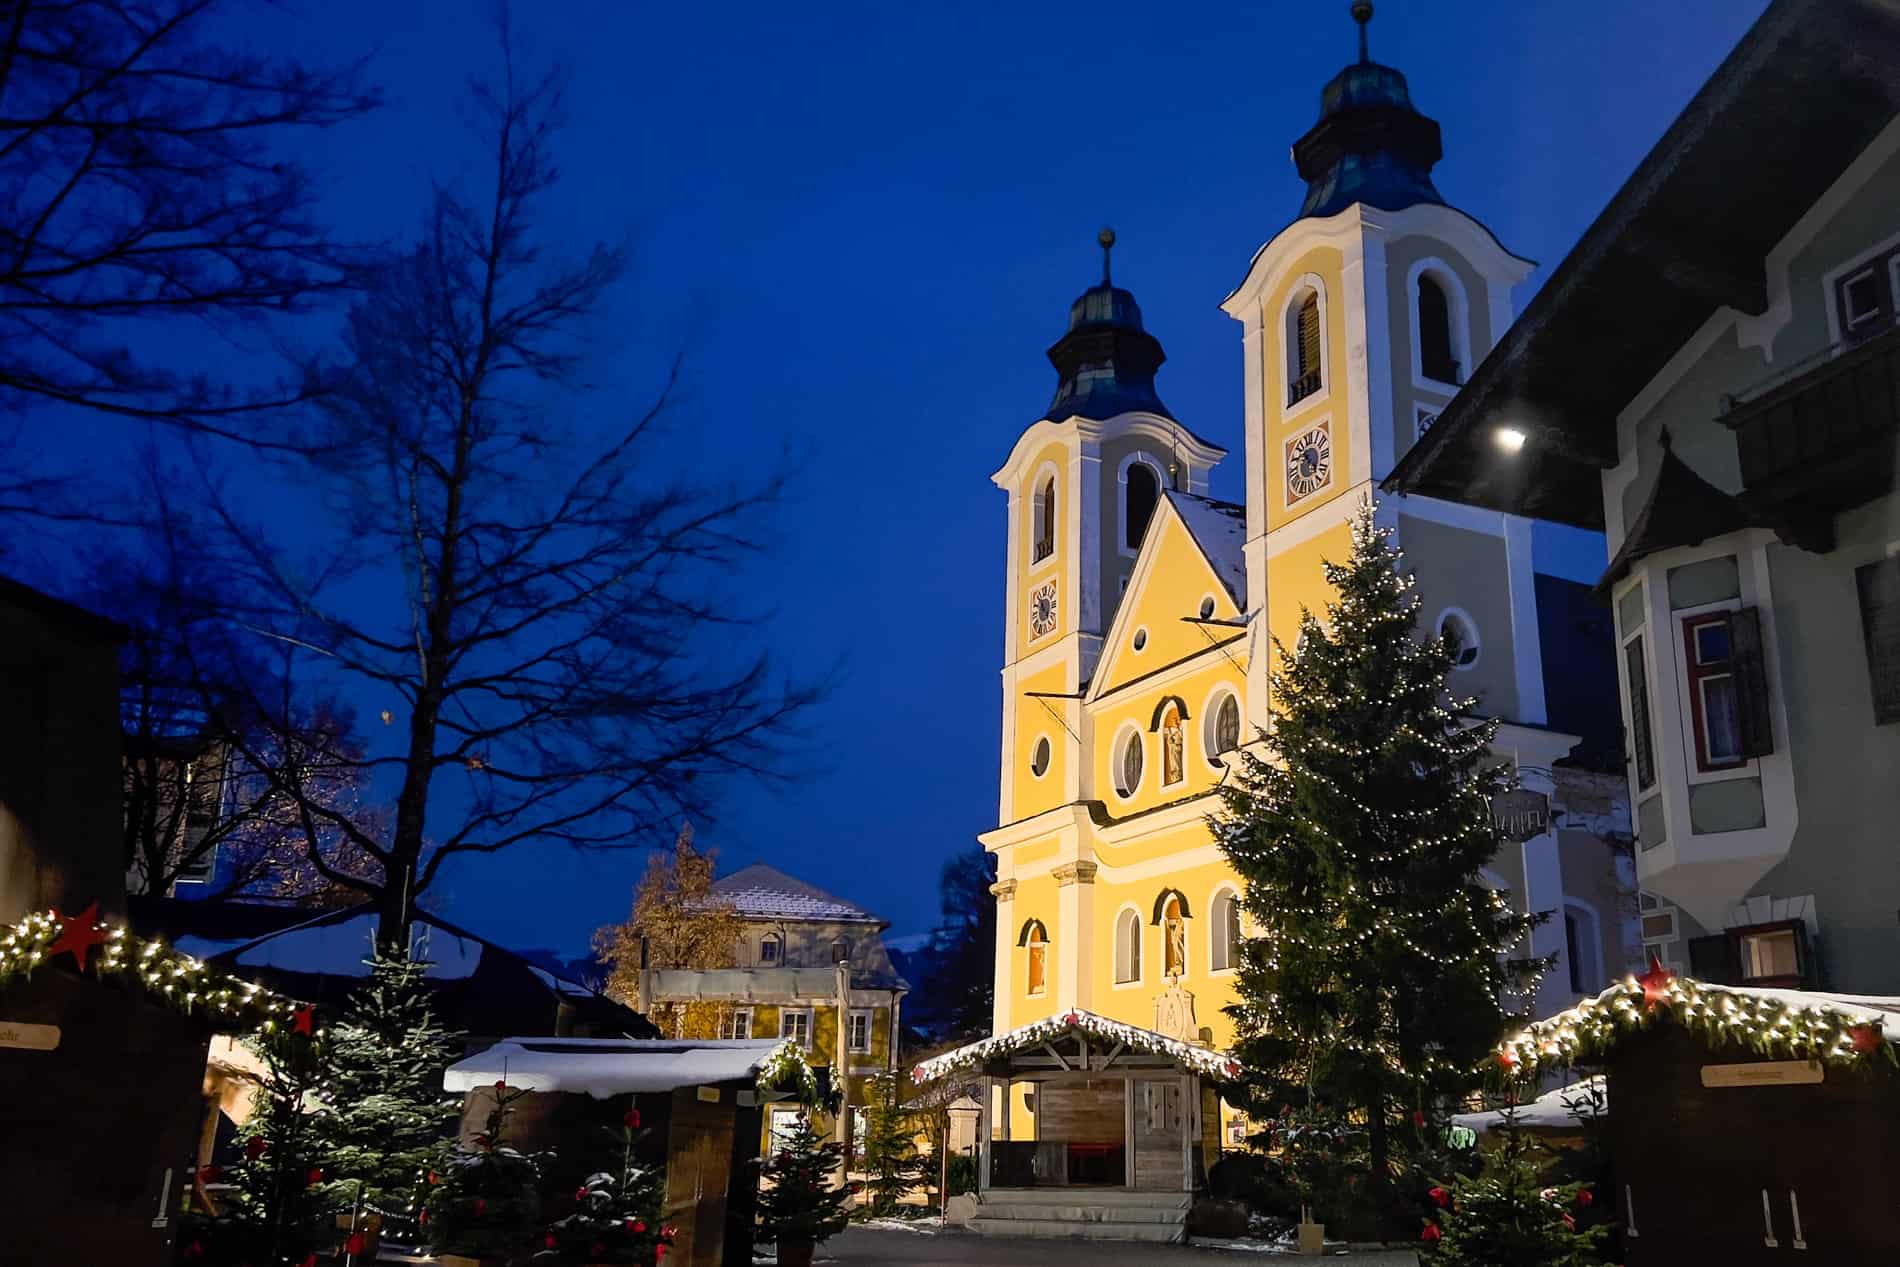 St. Johann in Tirol, Austria at night, with Christmas lights and the glowing yellow church. 